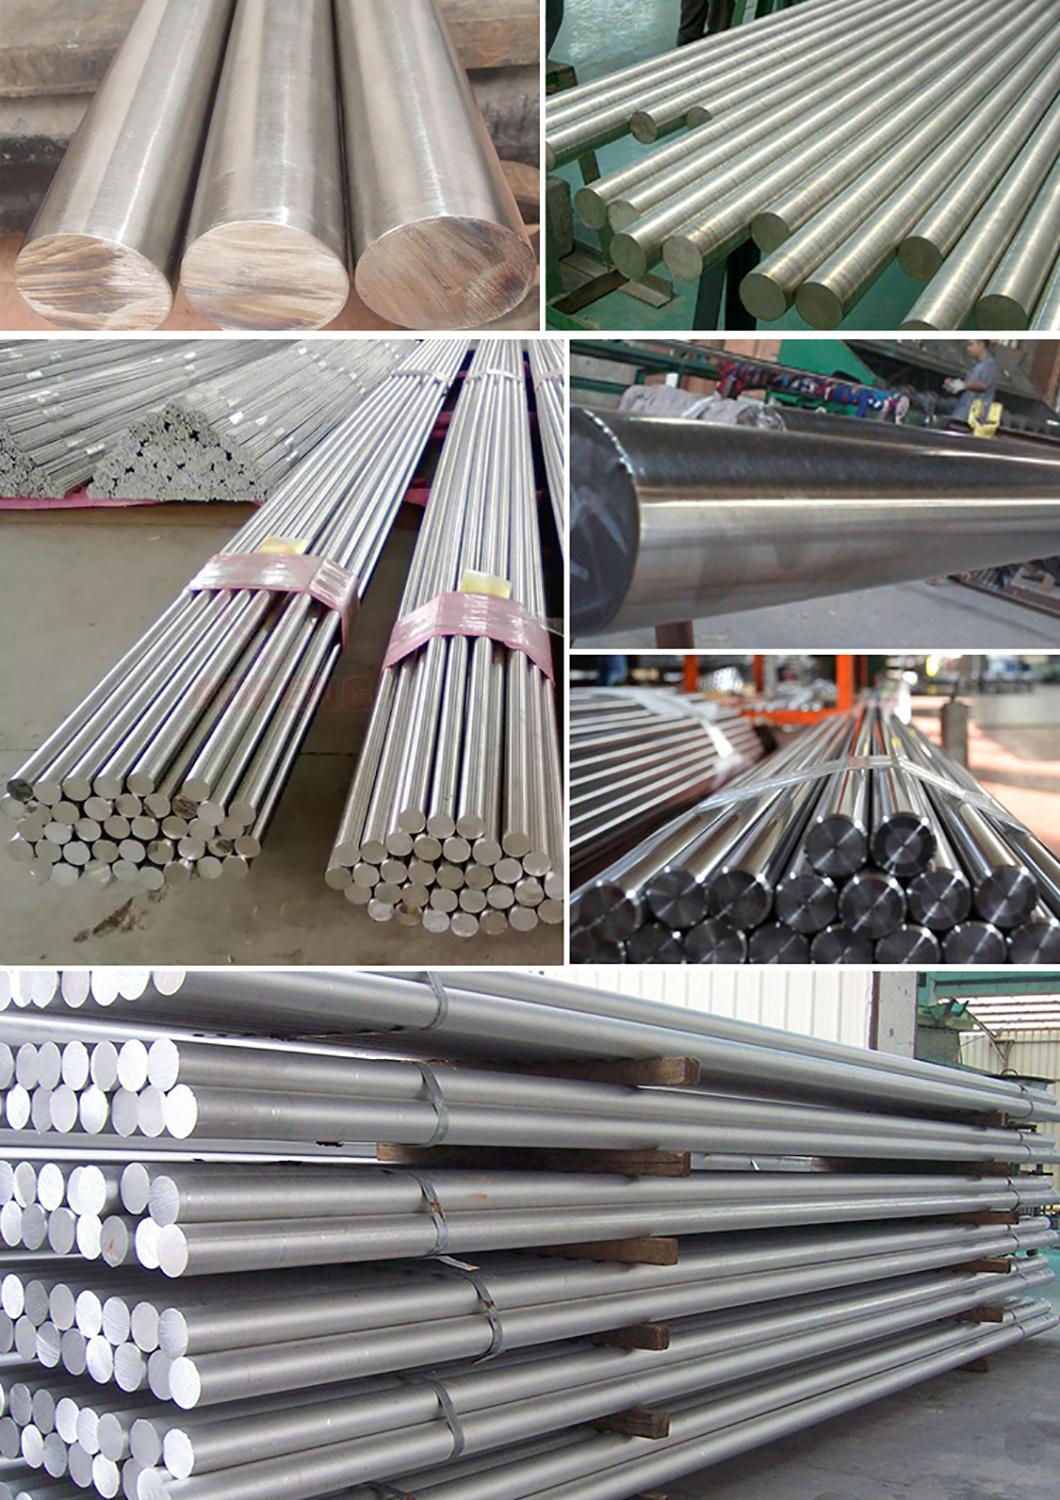 304/316 12 mm Stainless Steel Round Bar Stainless Steel Rod